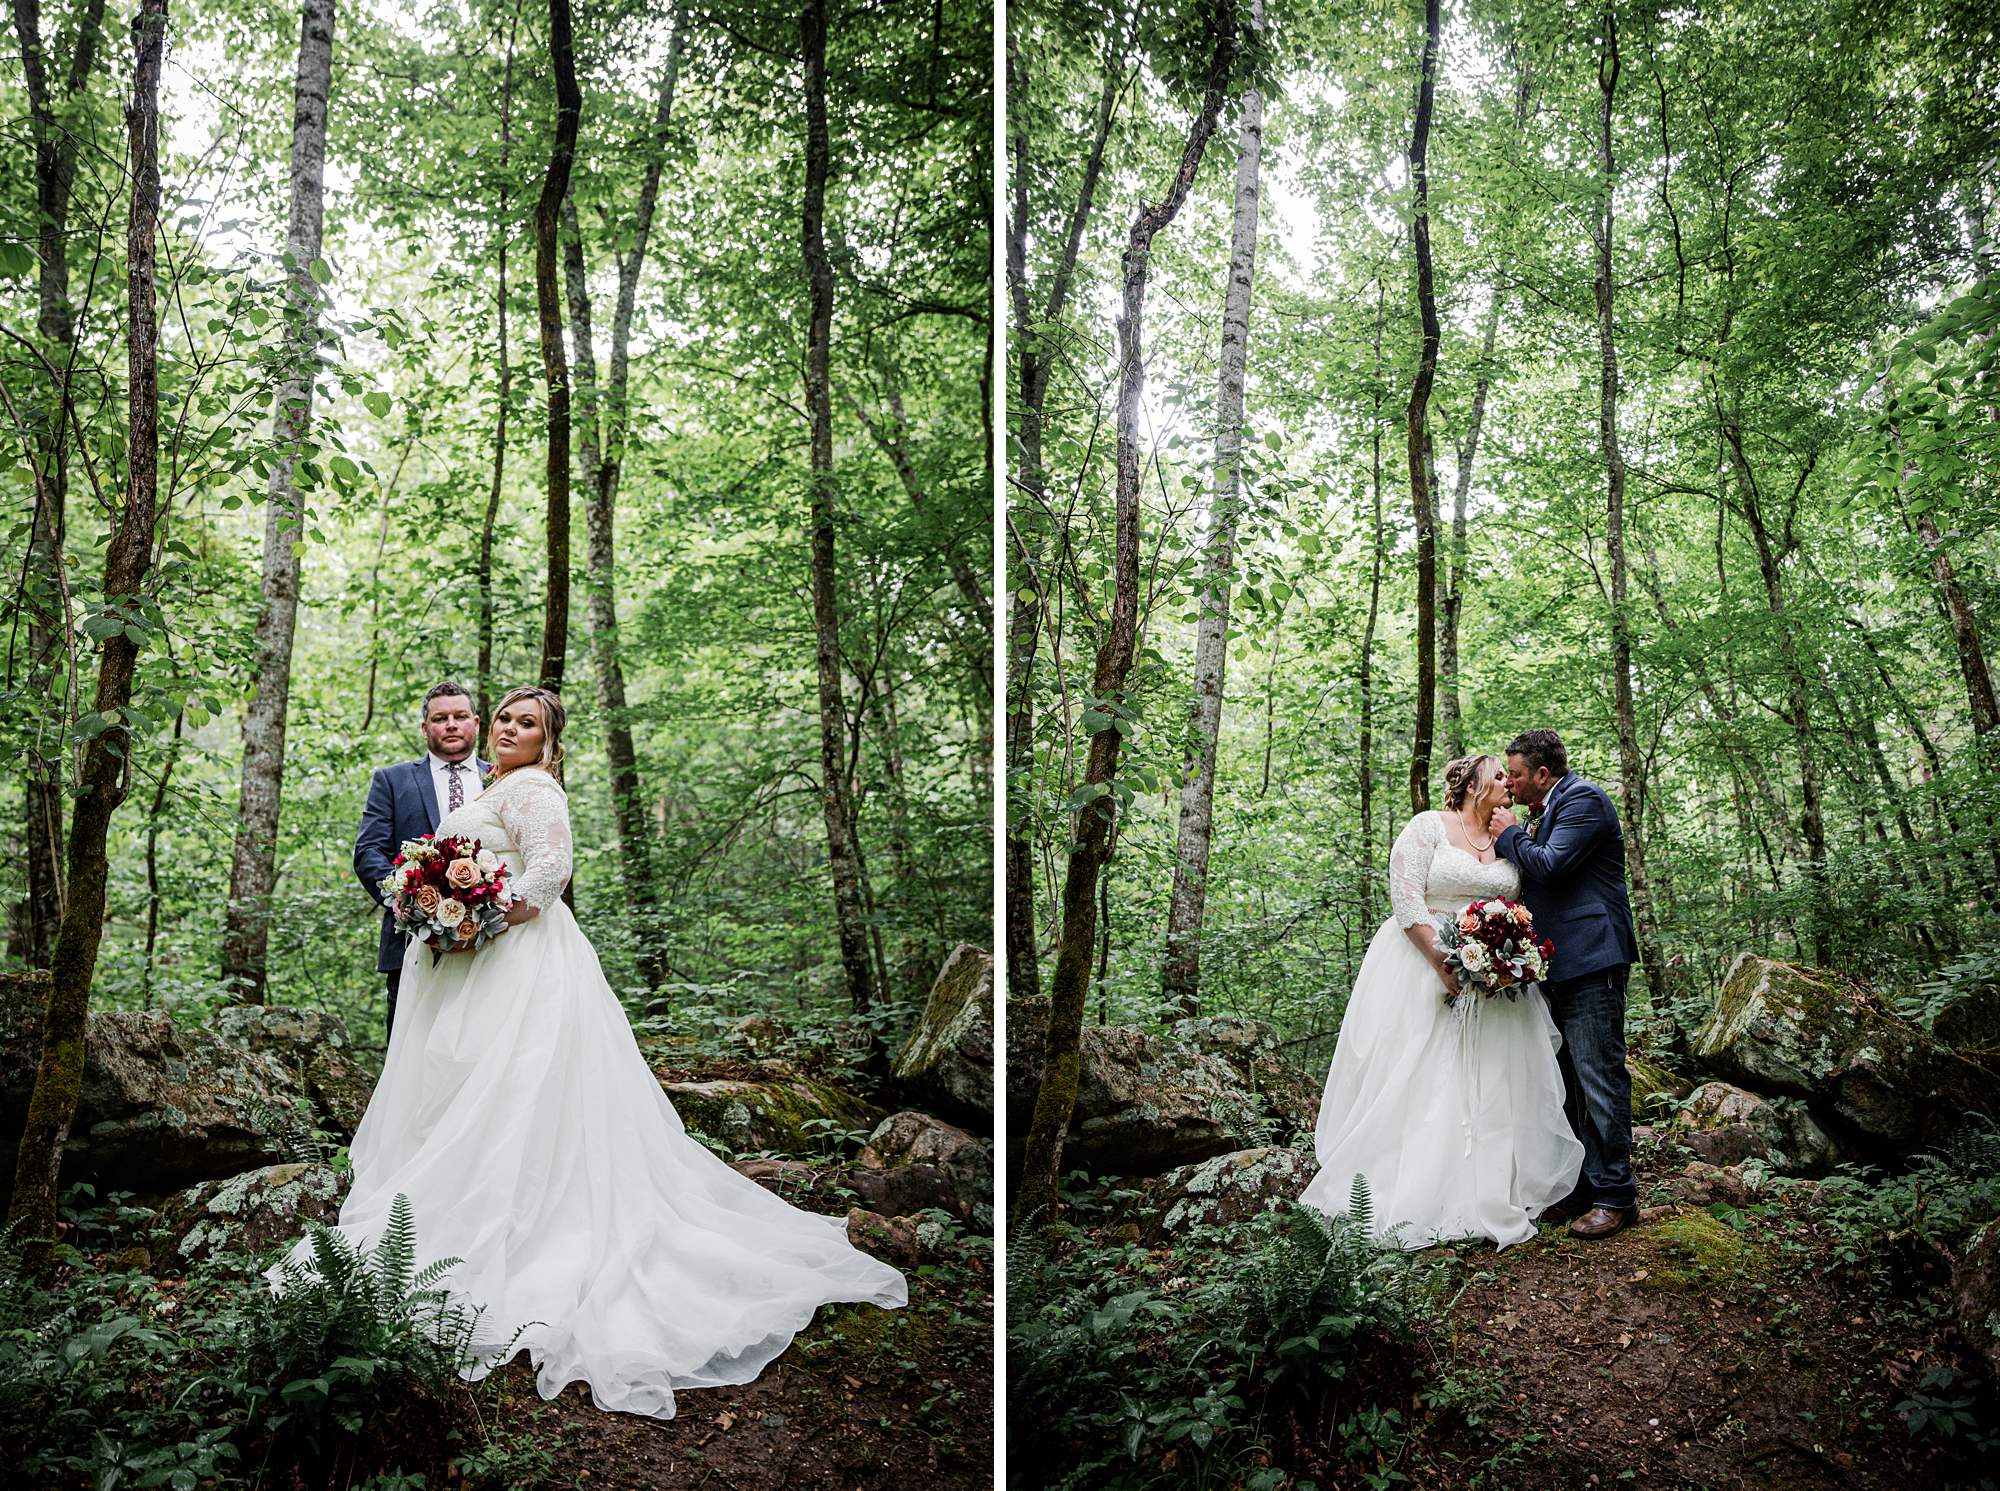 Where to get married in the Smoky Mountains